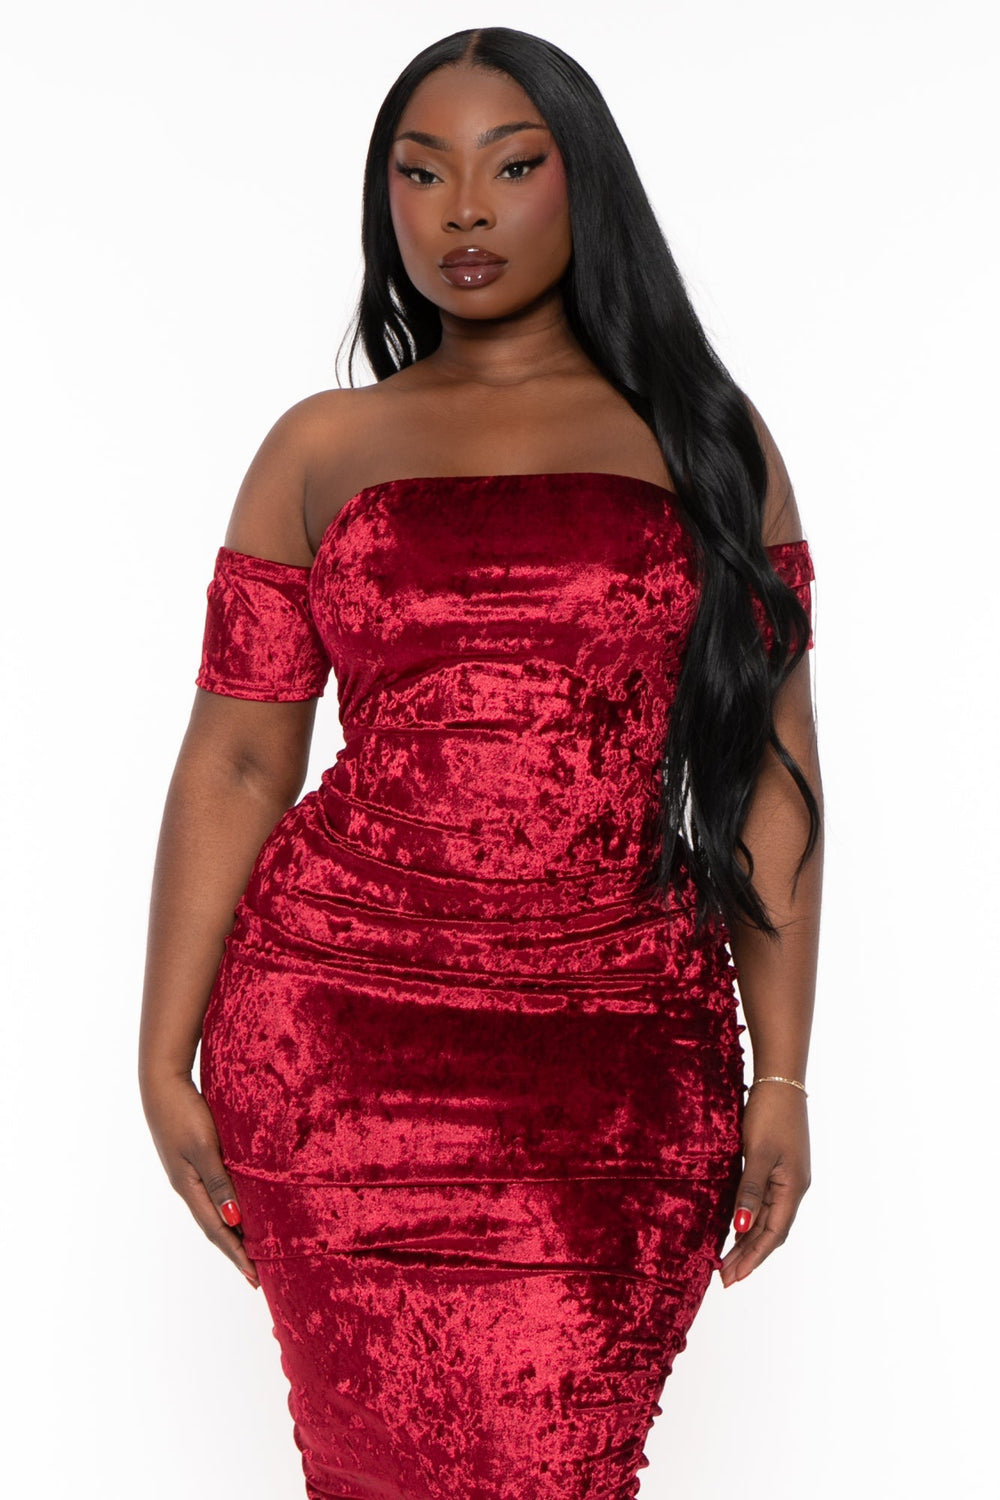 Curvy Sense - The sexy  Faux Leather Peplum Dress  is back in town. Only  $30 at curvysense.com. . Use code: PARTY15 for 15% off . . .  #plussizefashion #plussize #plus #